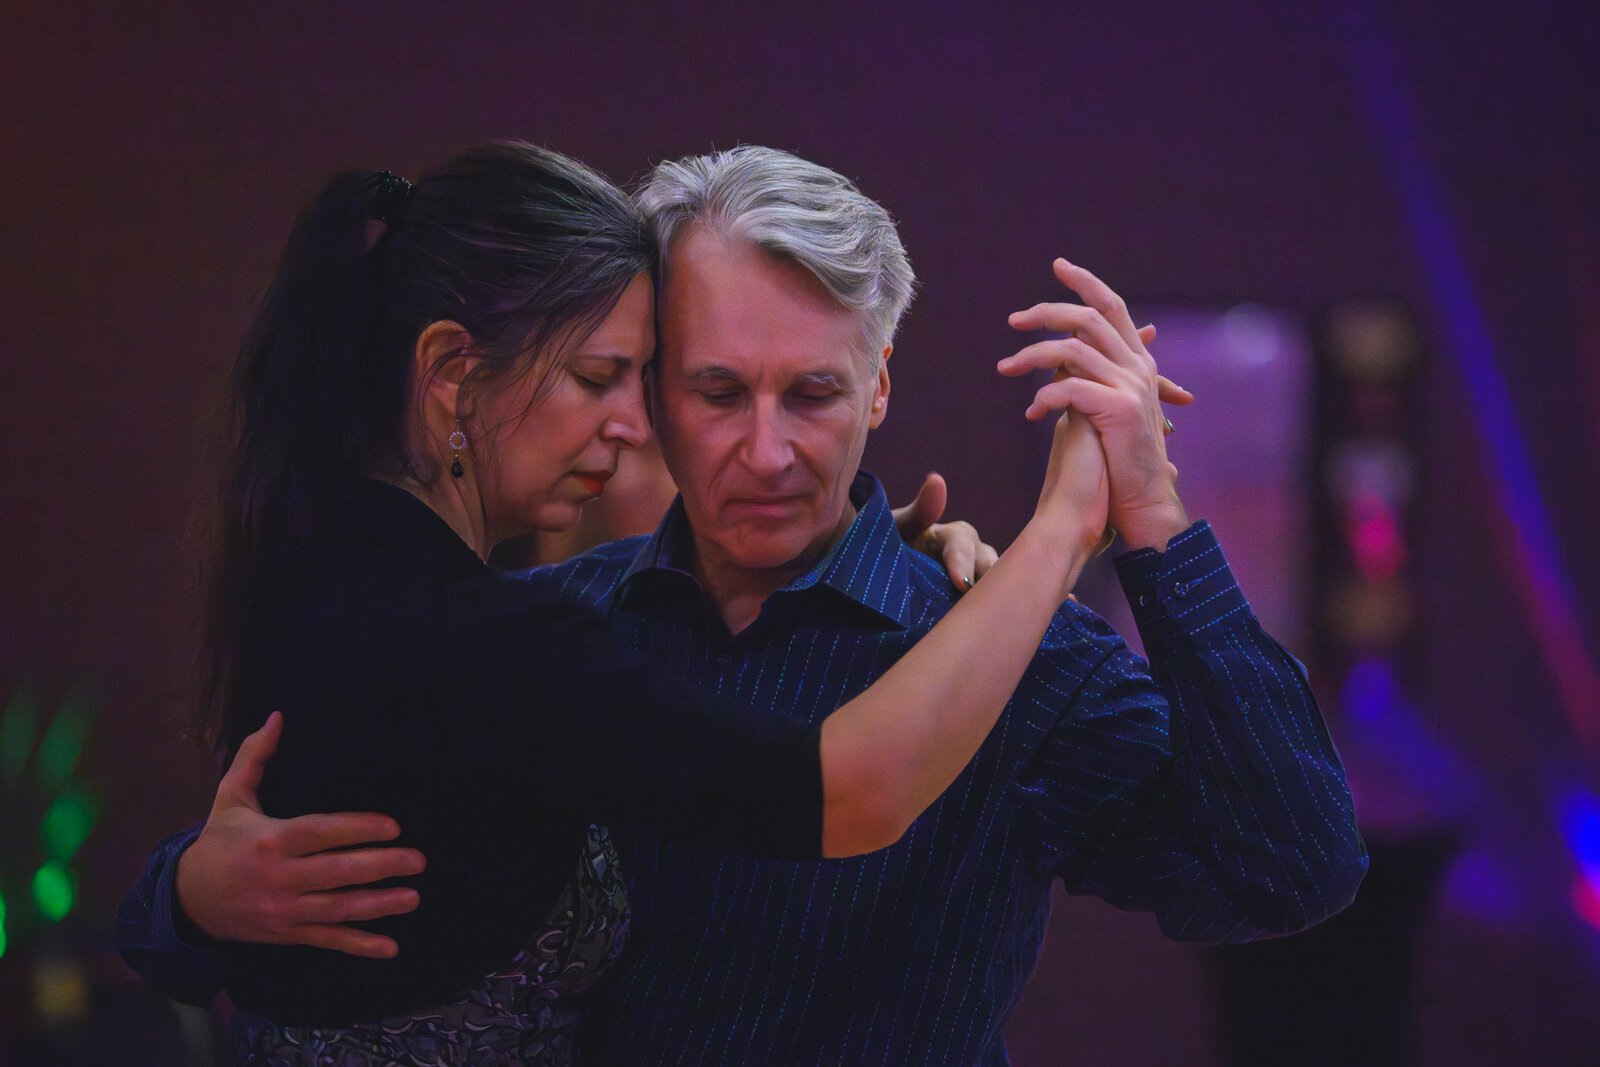 La Mirada First Friday Milonga at Fred Astaire Dance Studios in Ann Arbor.